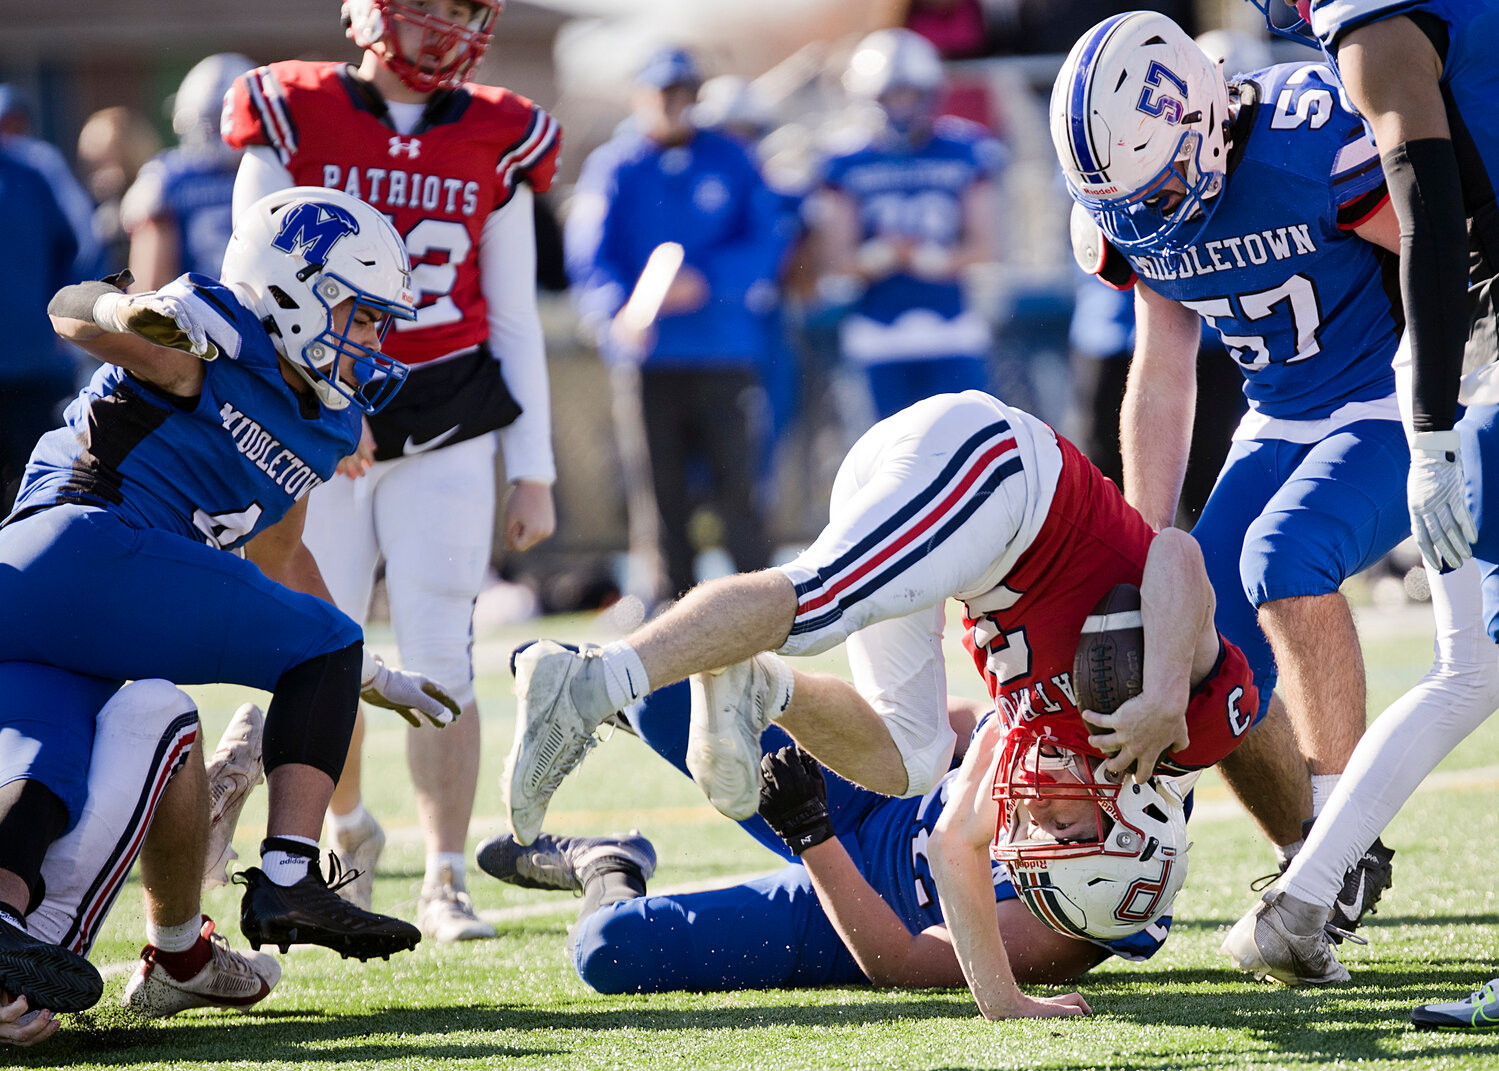 Jack Voute takes a tumble while running through the Middletown defense.